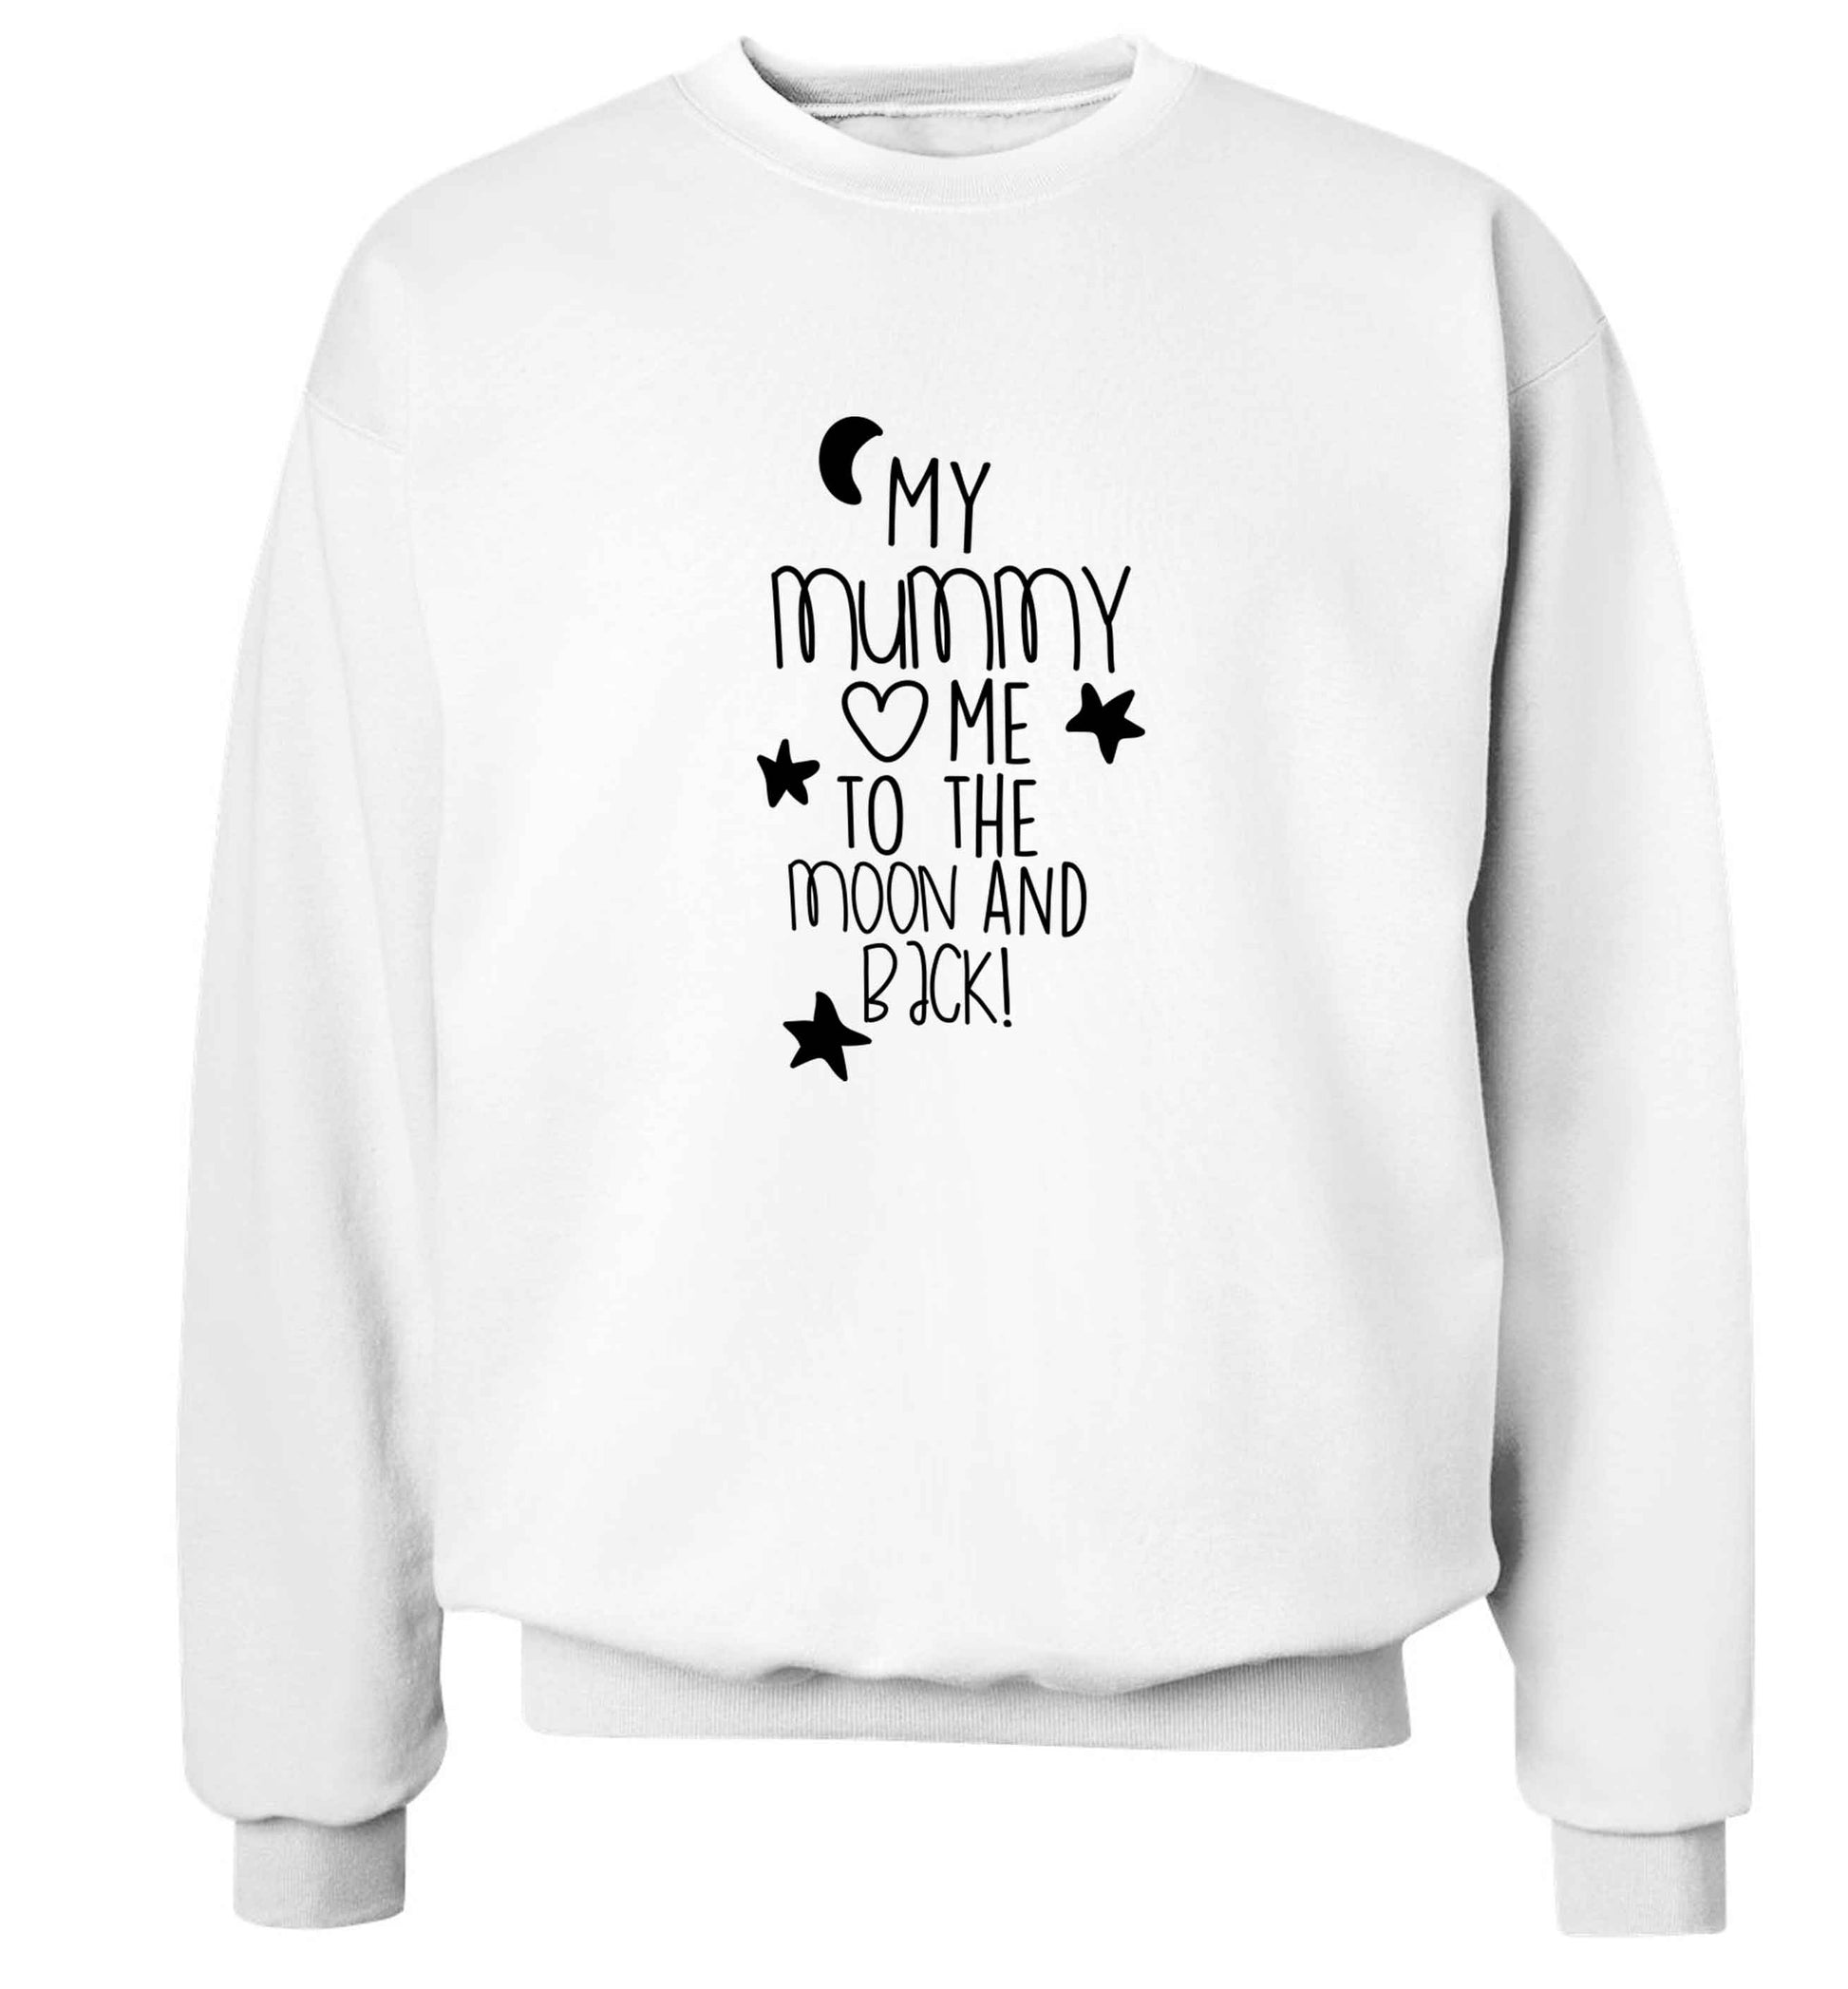 My mum loves me to the moon and back adult's unisex white sweater 2XL